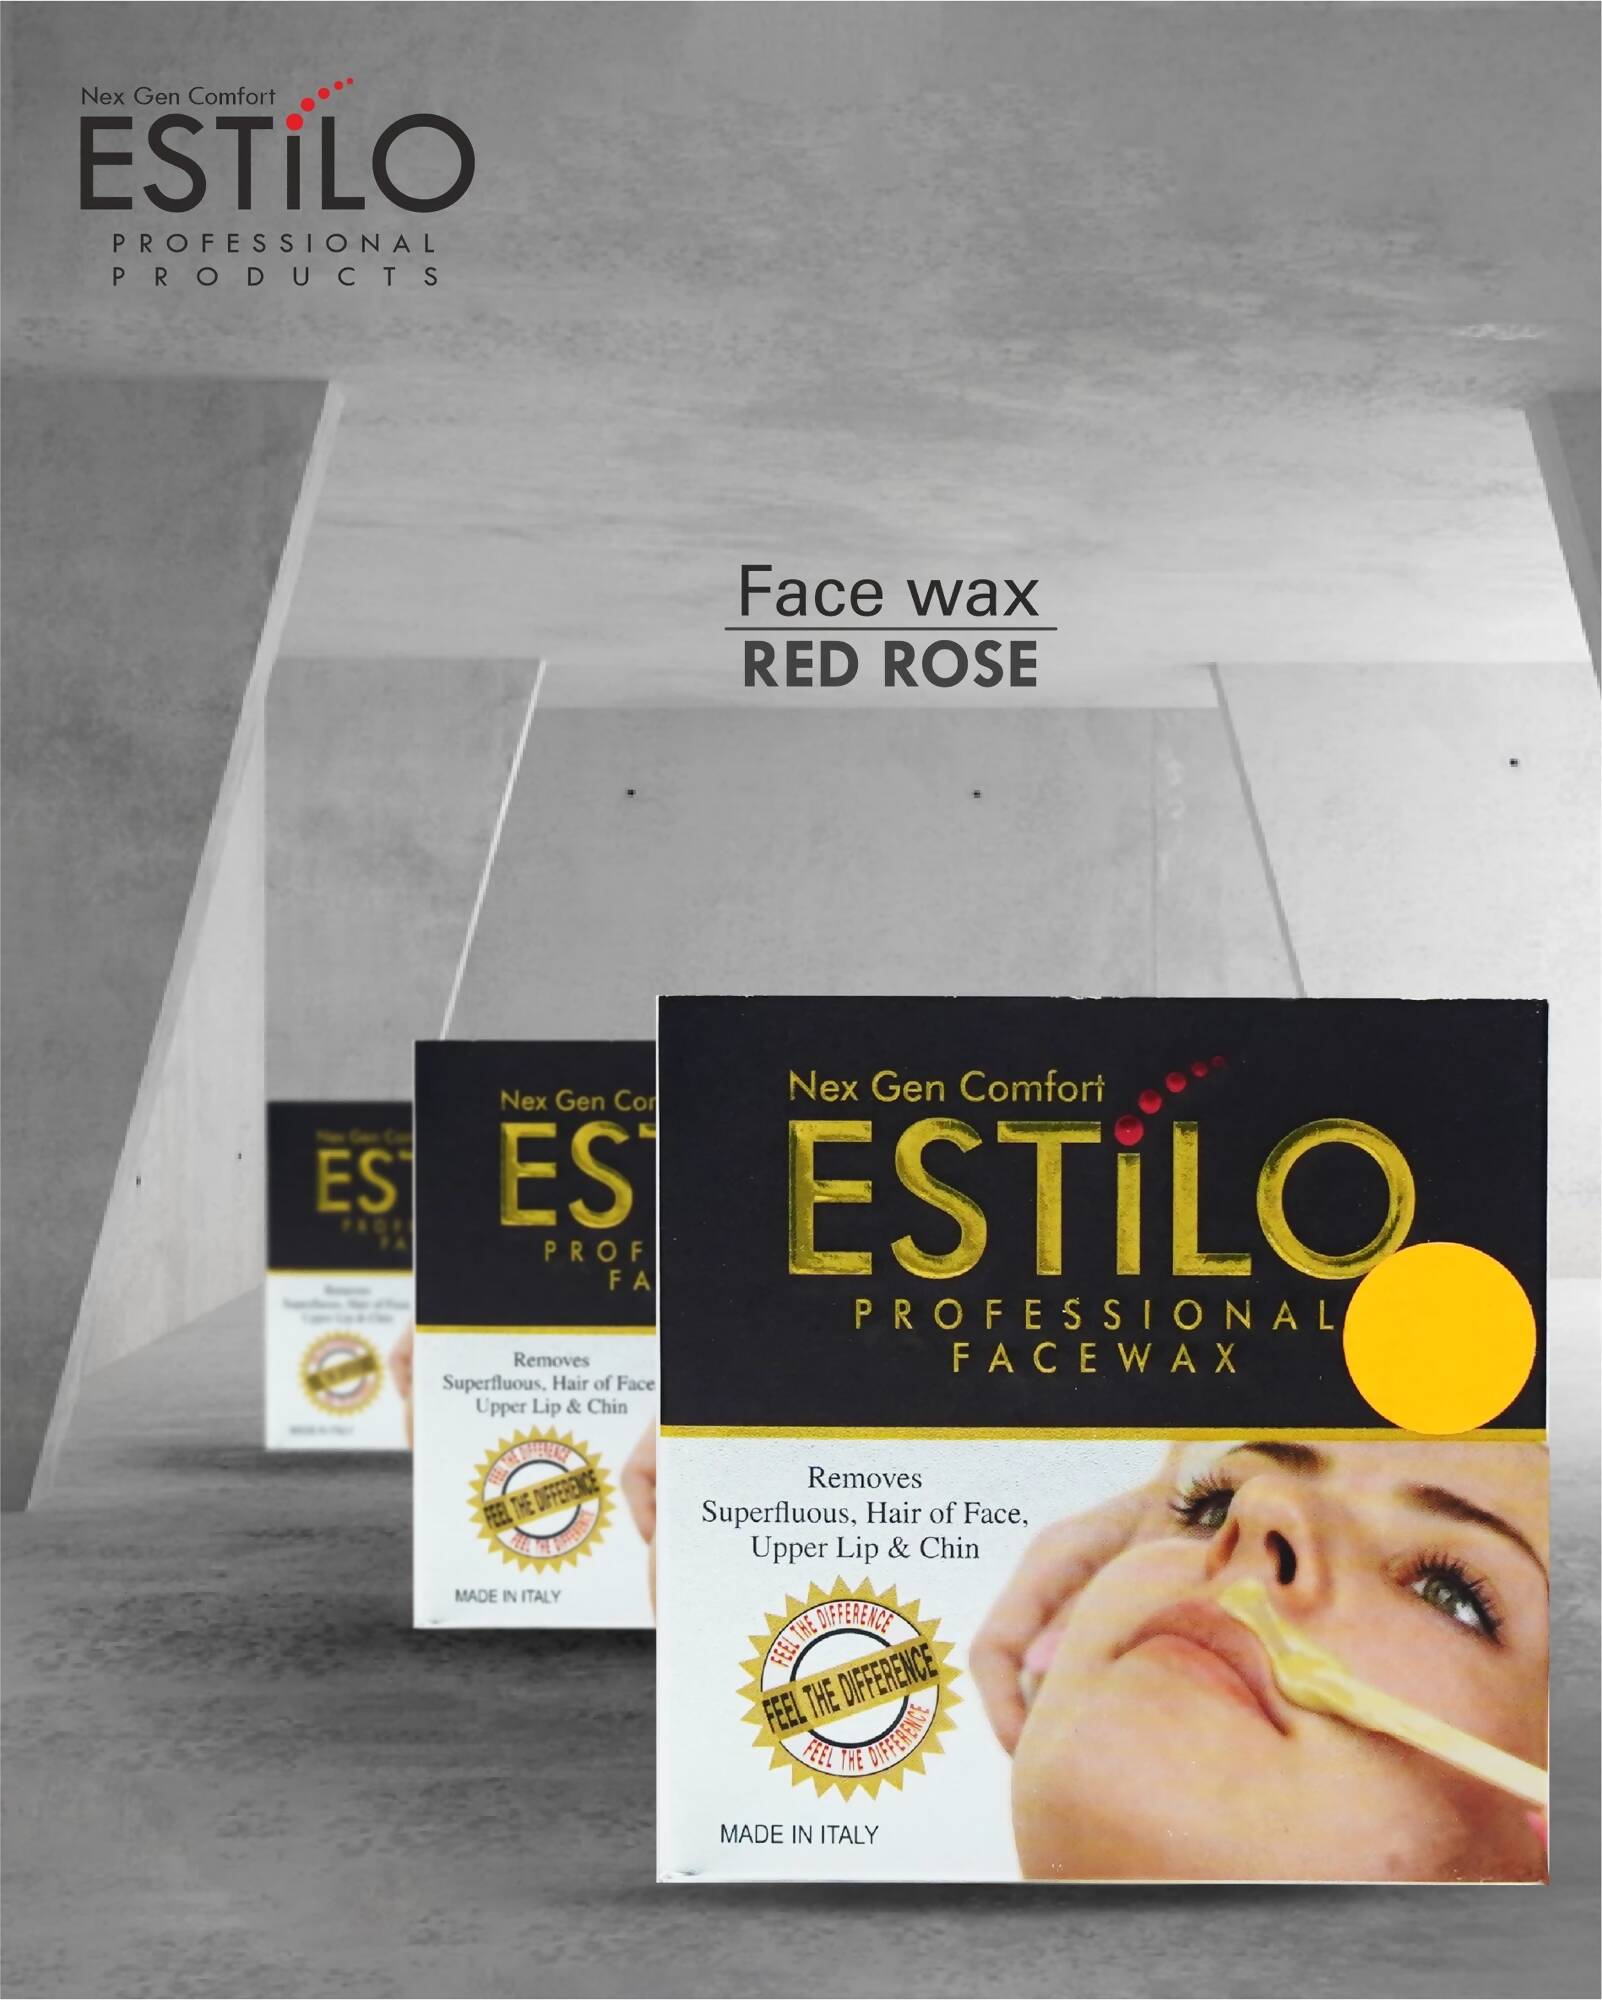 face wax with red rose